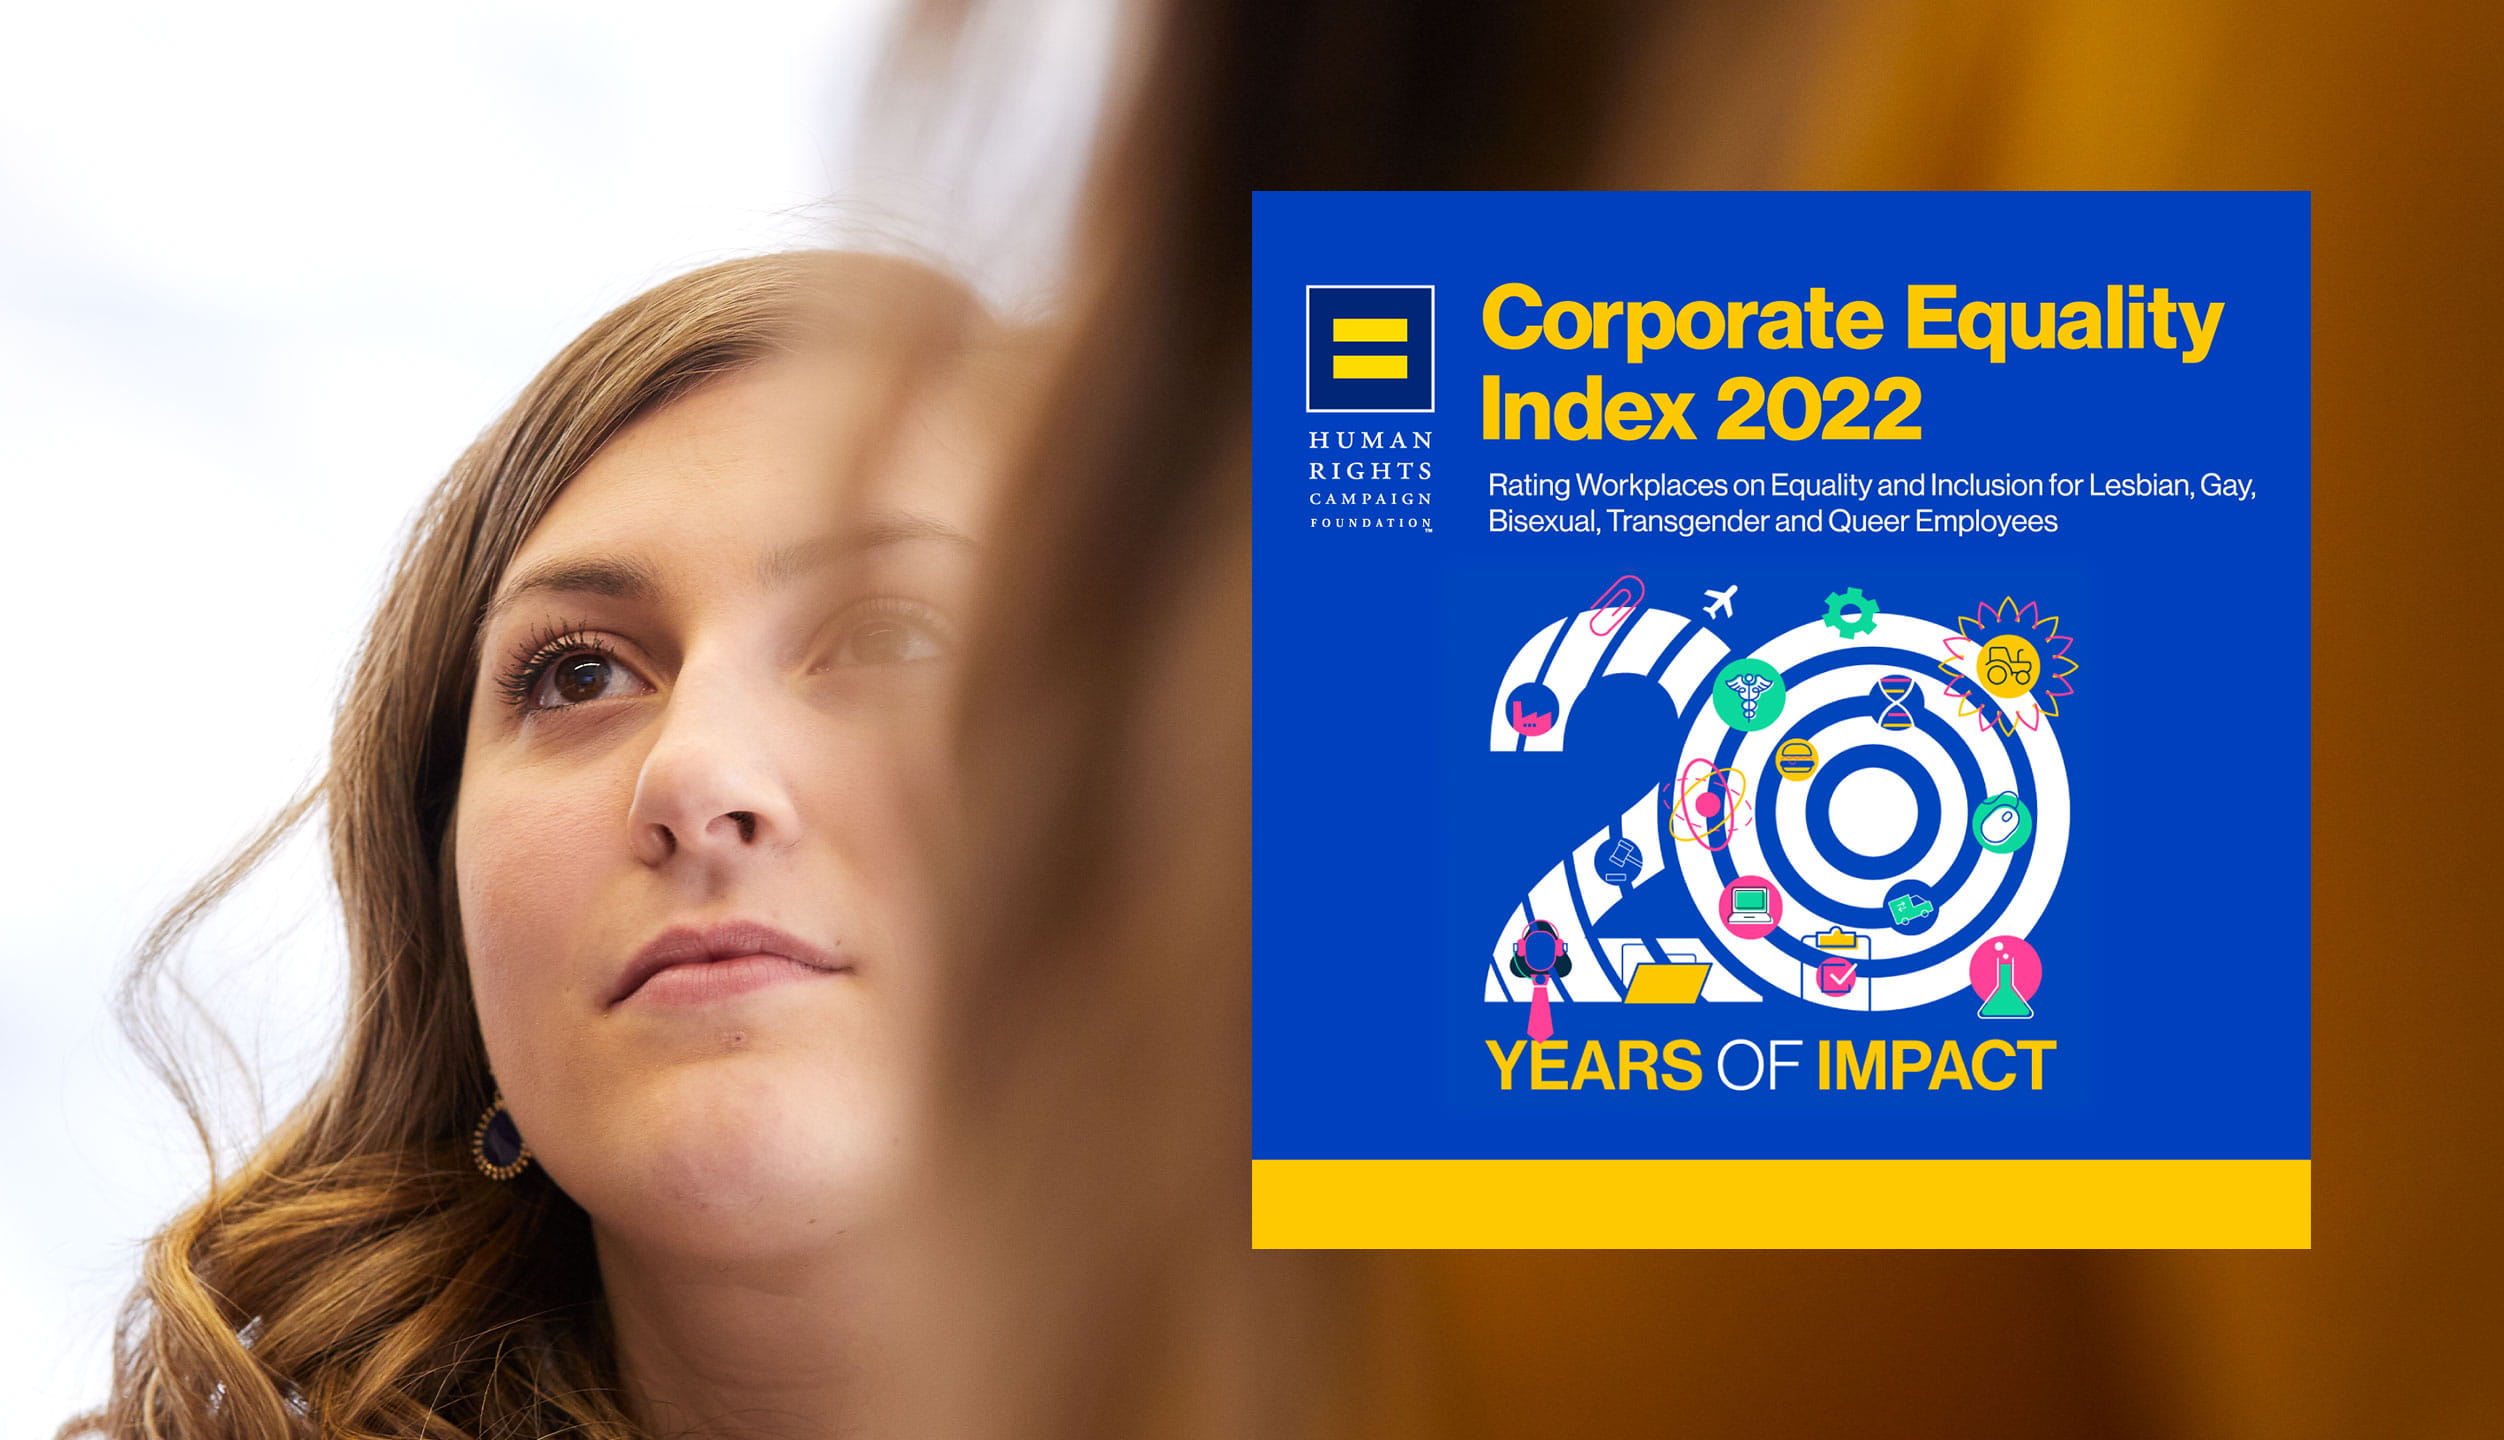 Human Rights Campaign Foundation’s 2022 Corporate Equality Index